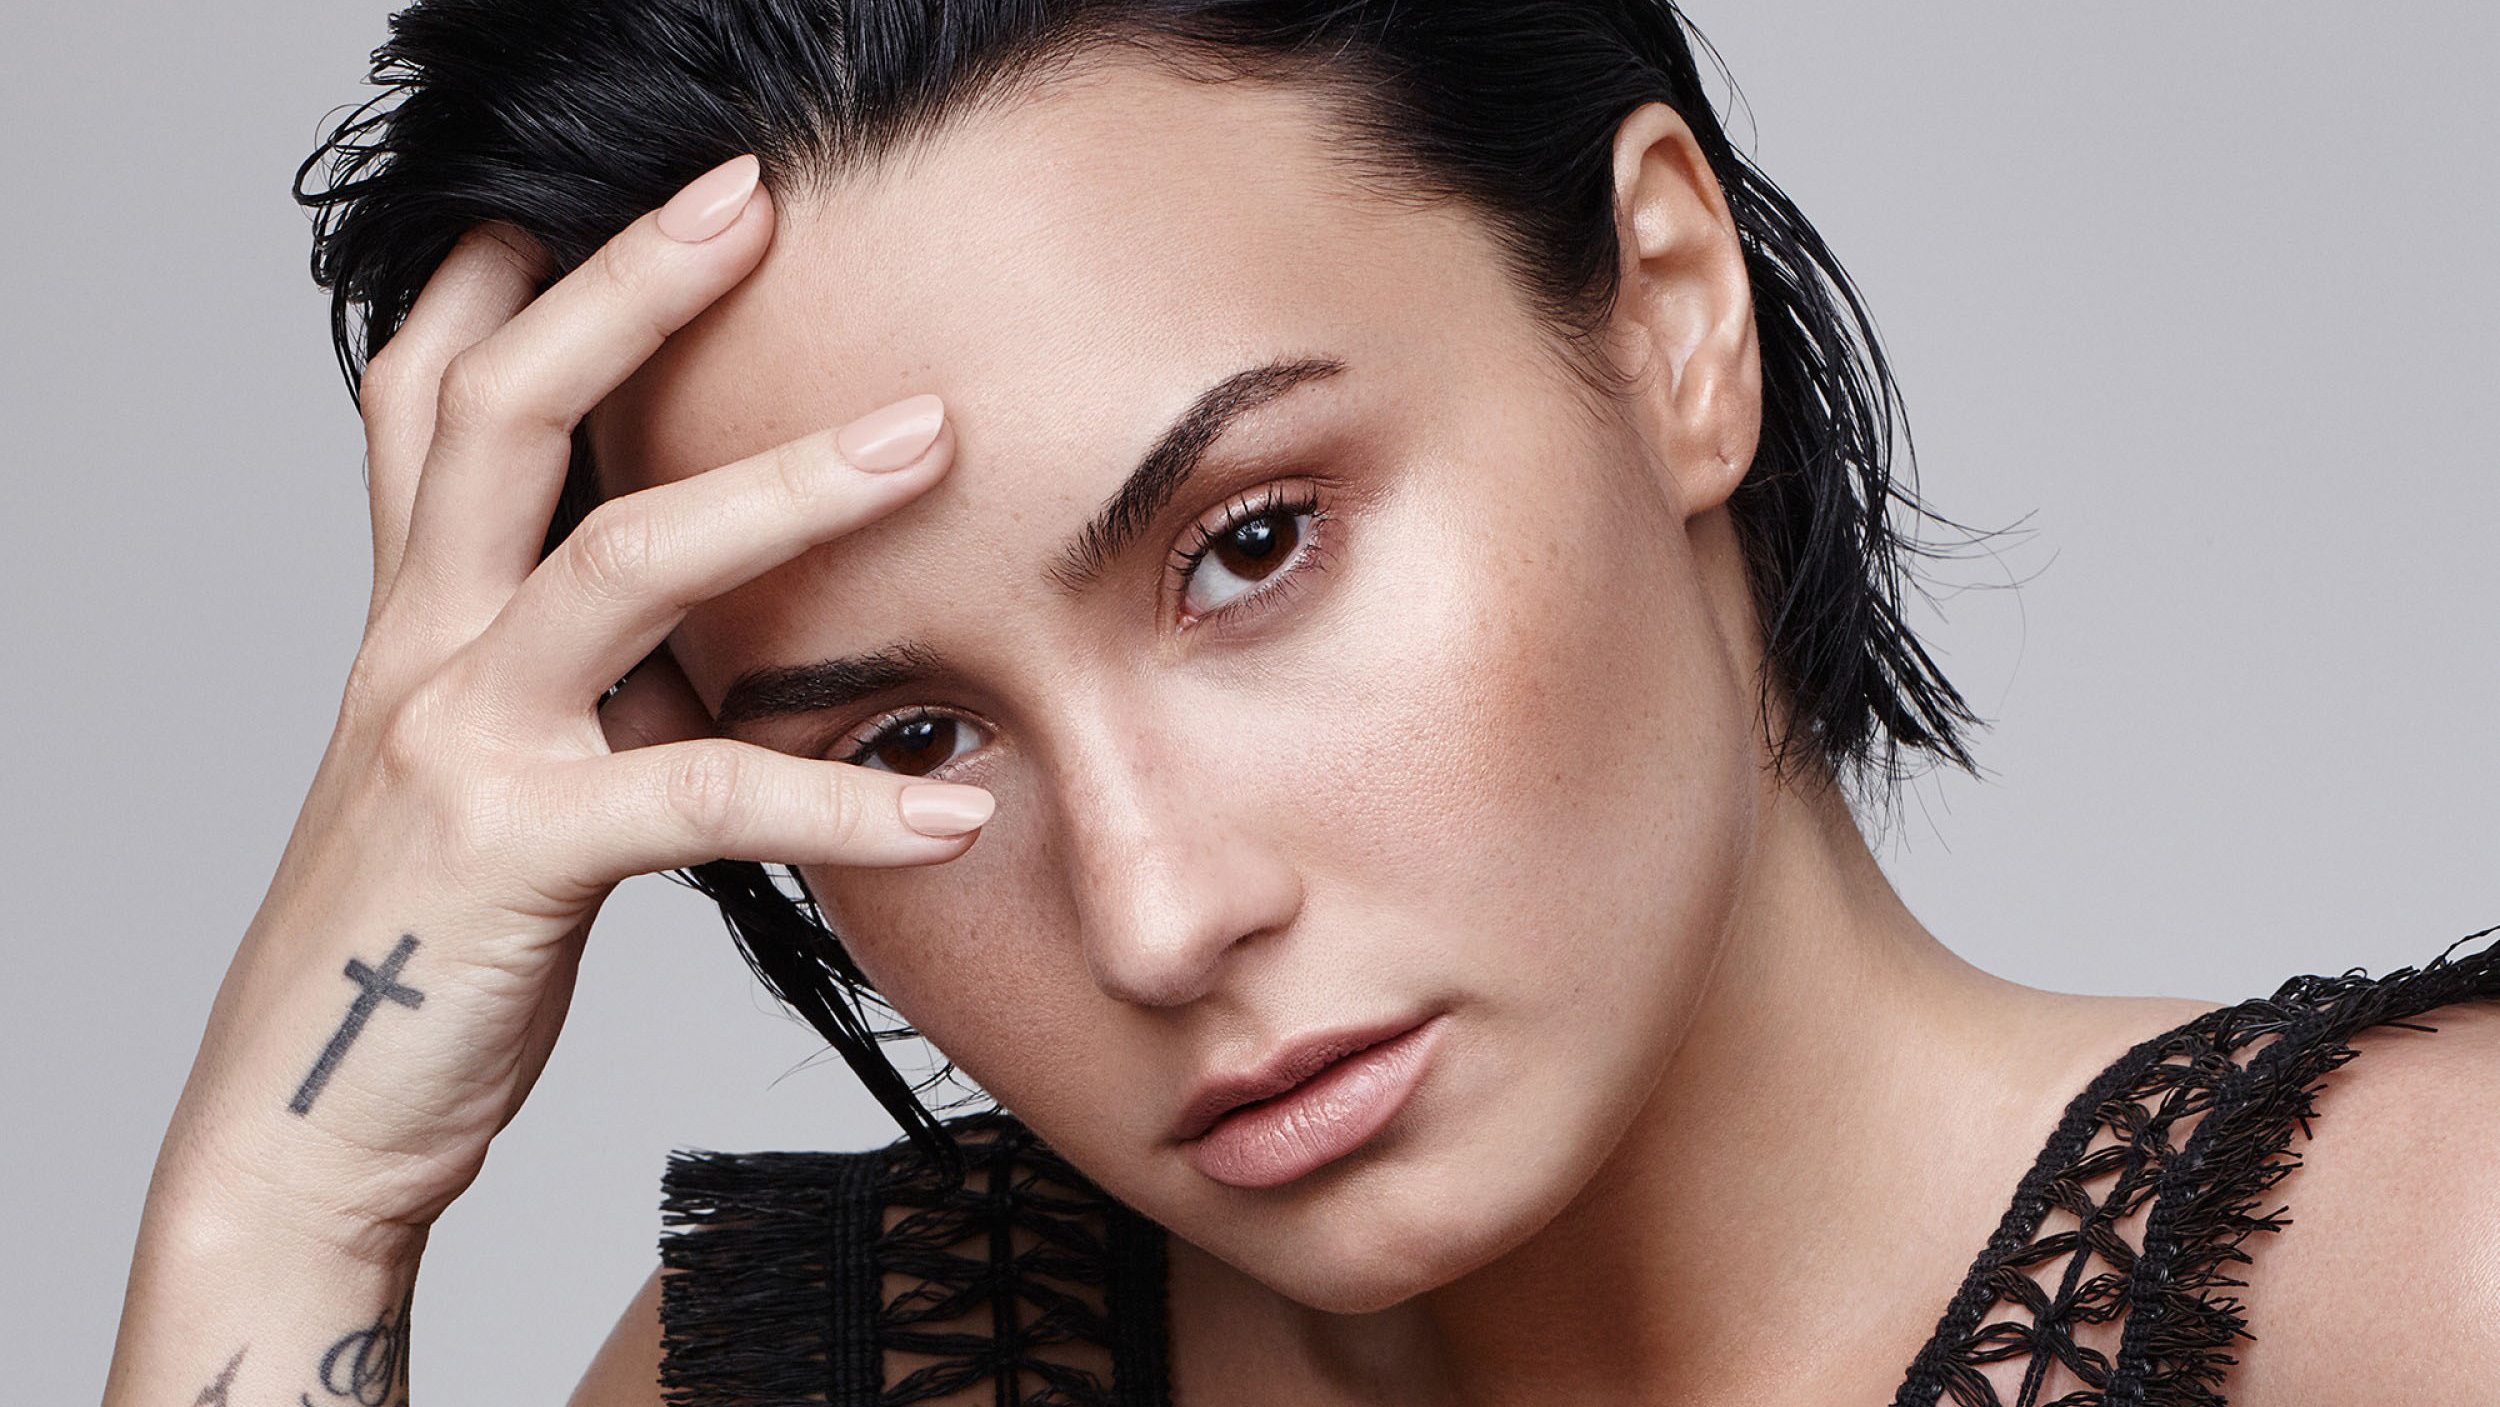 The inspiring message of Demi Lovato recalling her relapse and eating disorder